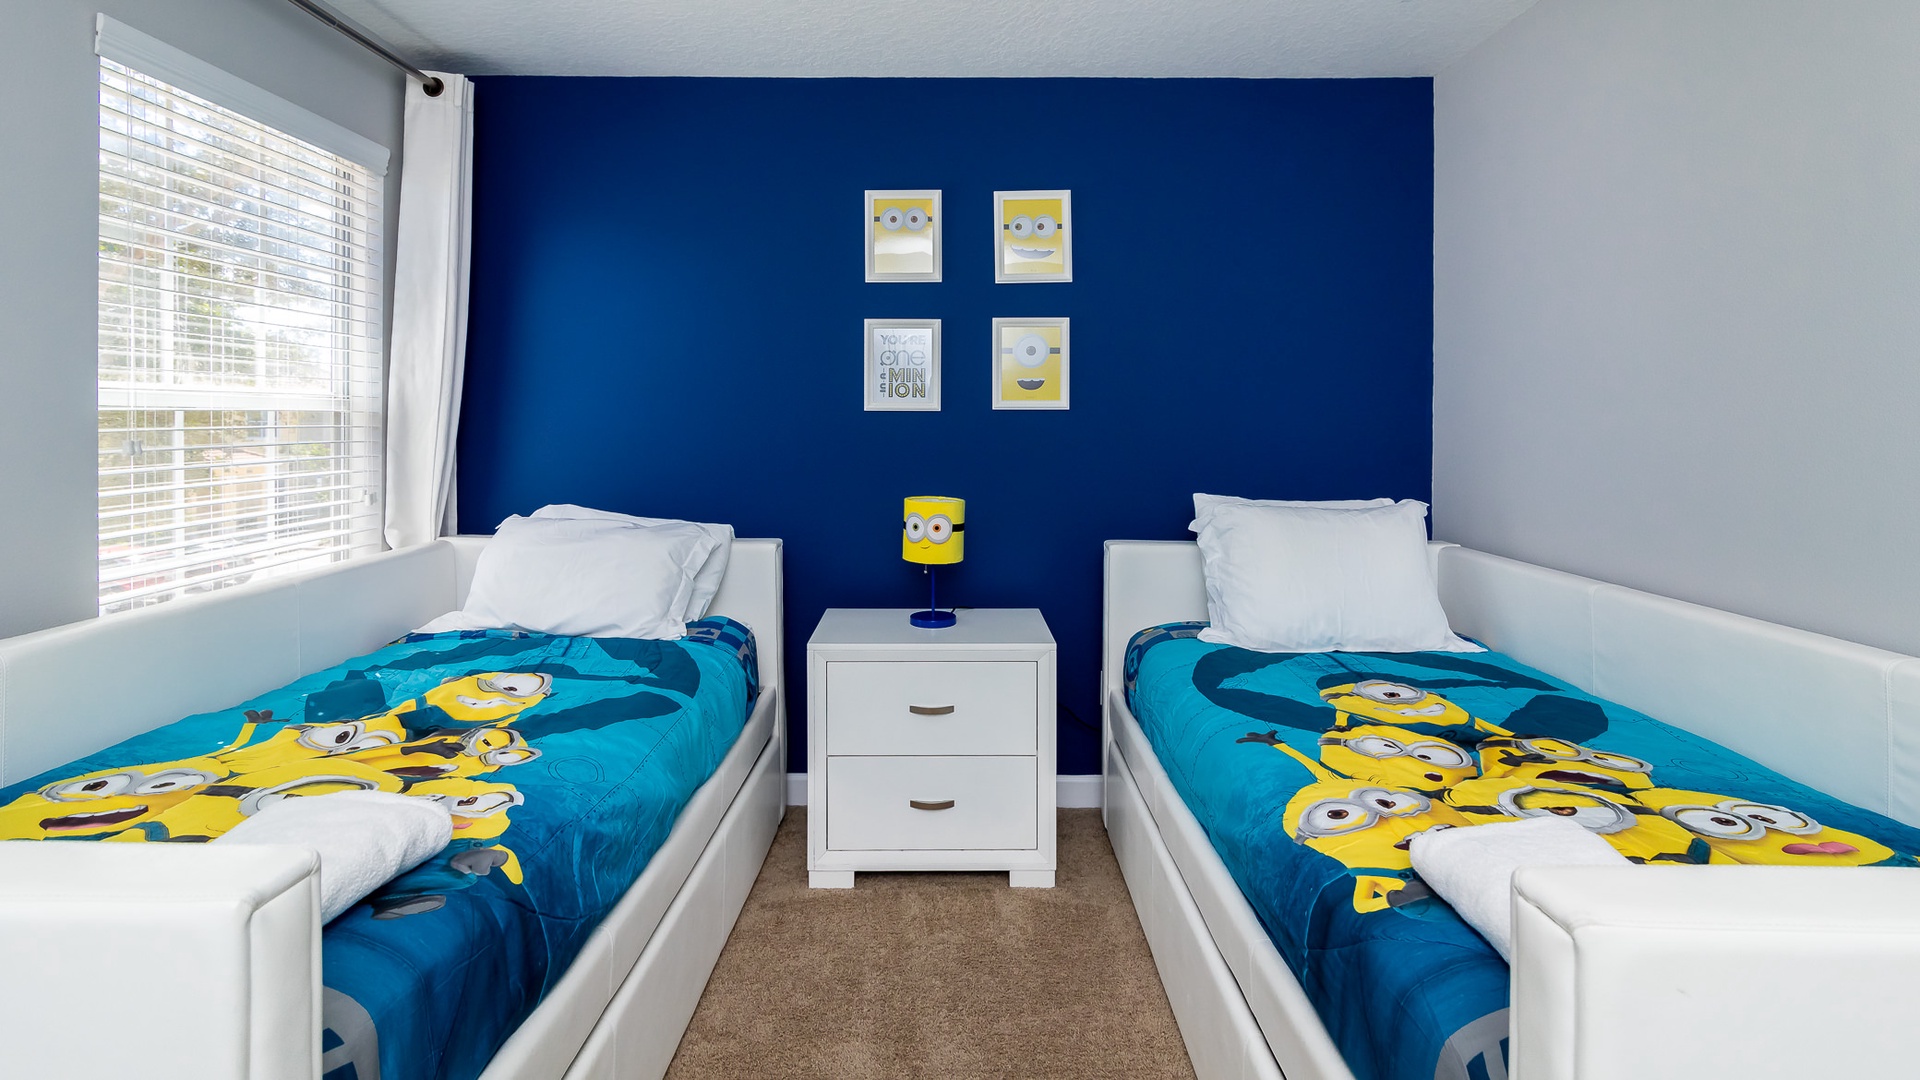 Second Floor Bedroom is all minions!